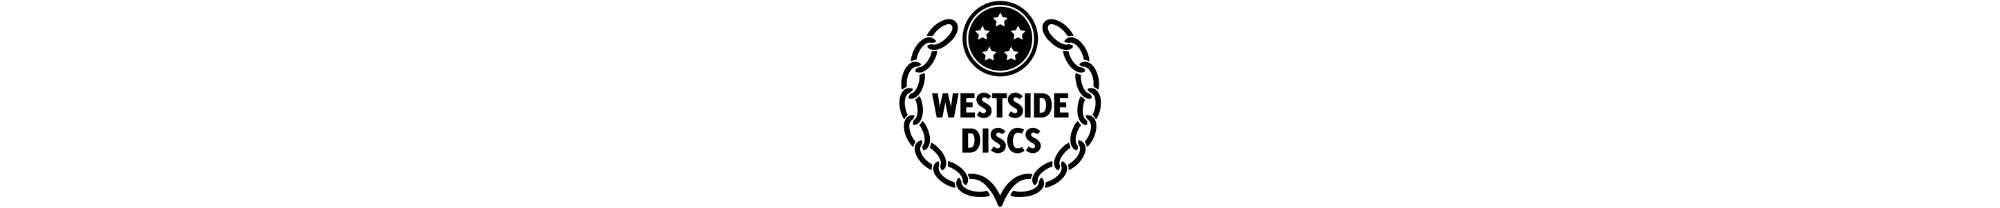 Westside Discs - Select to View Color Options